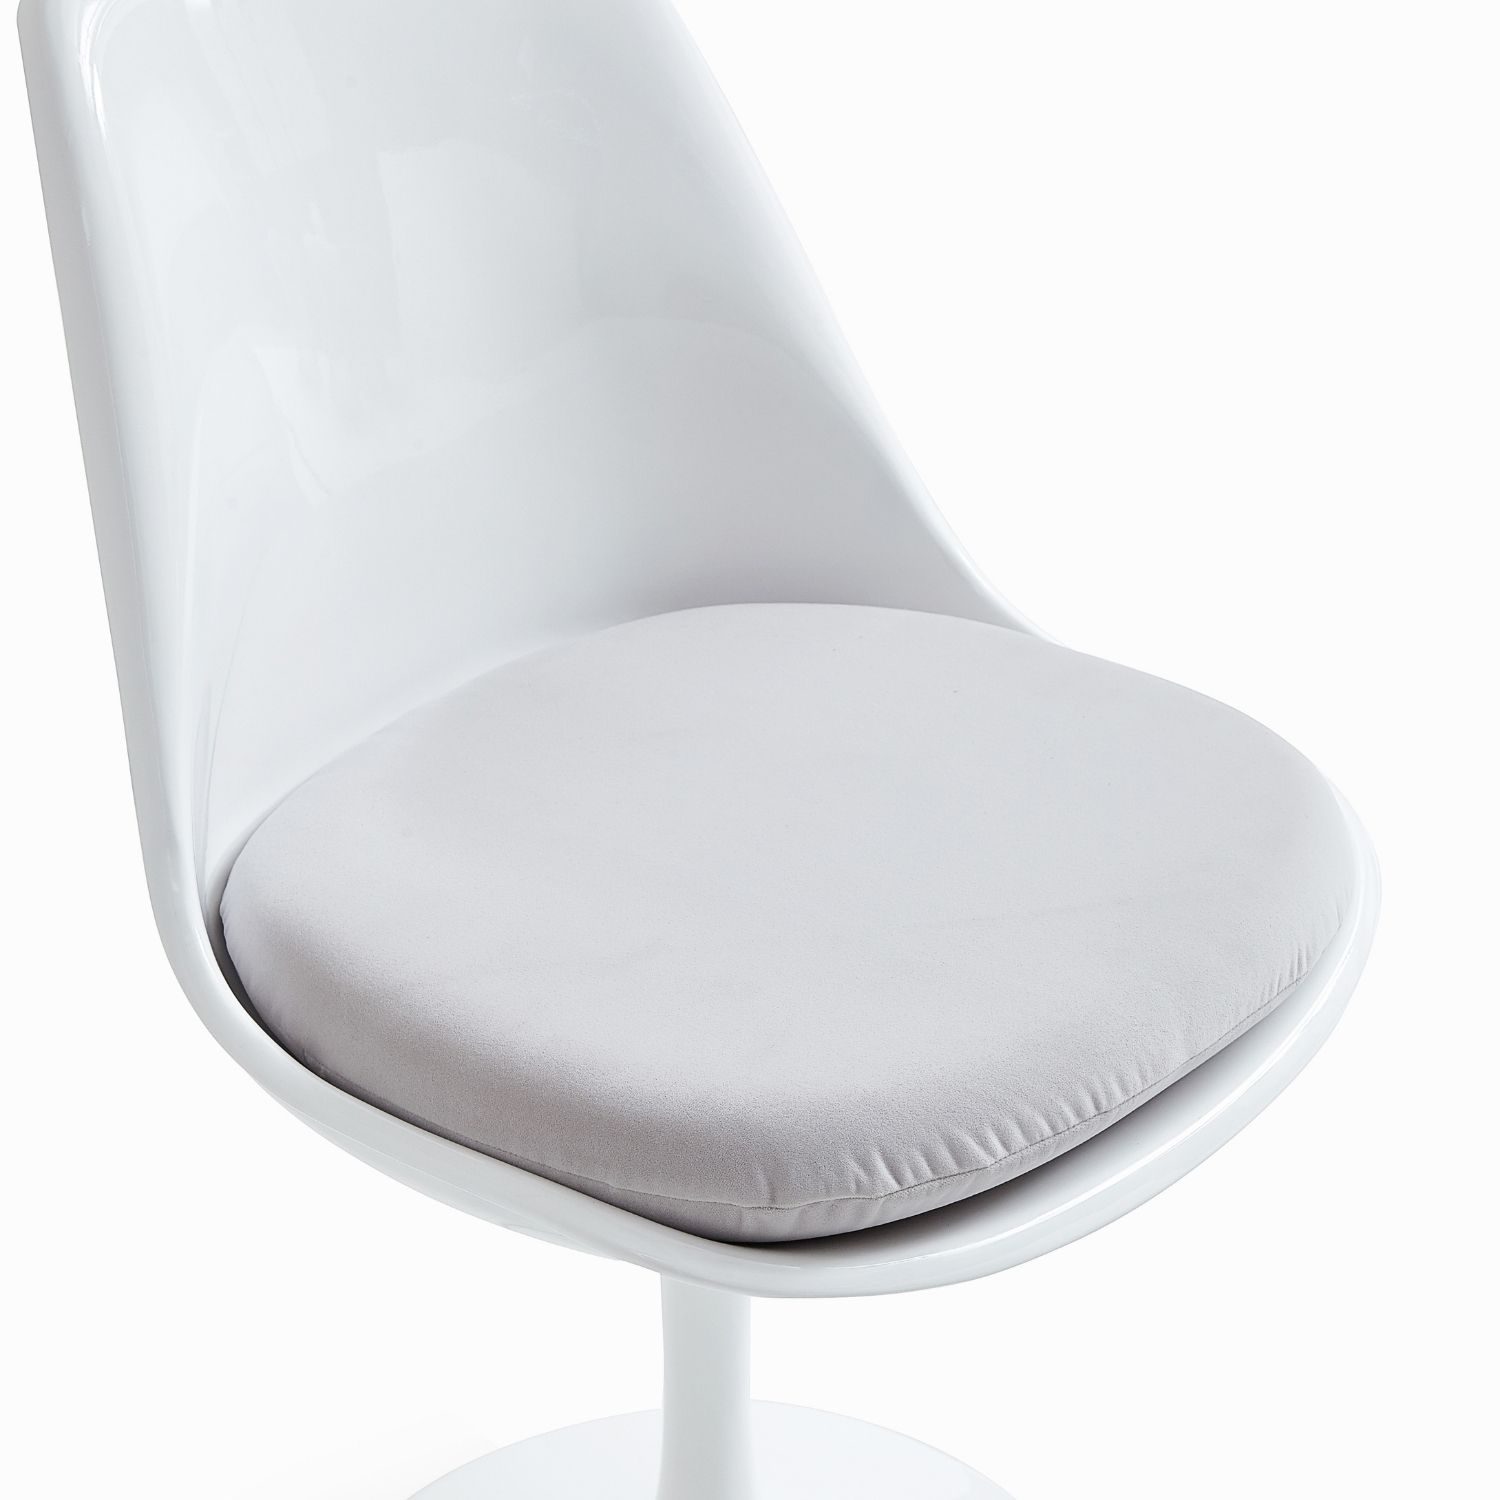 Mella Dining Chair - Valyou 